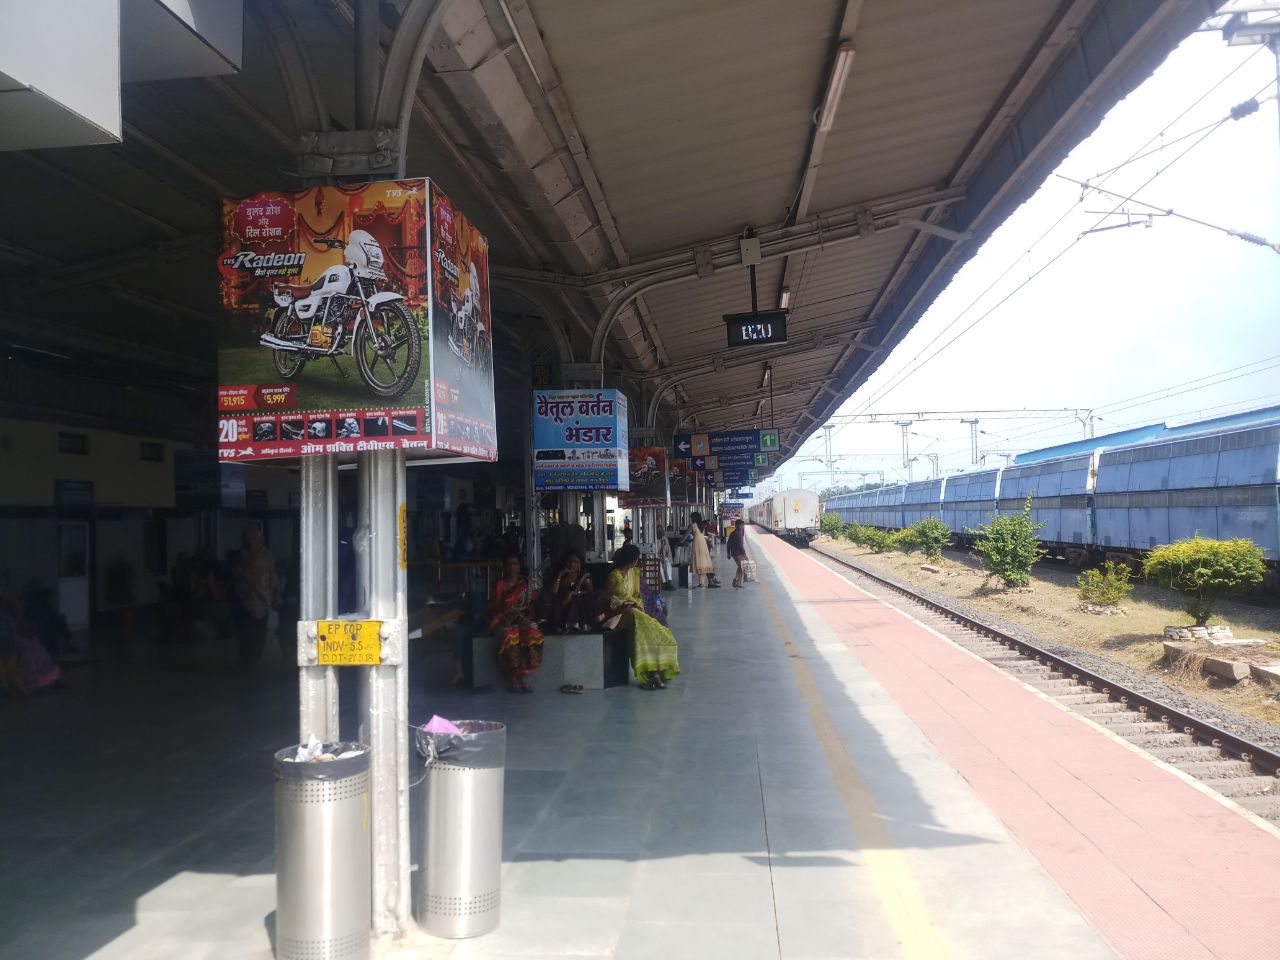 Passengers are not getting the facility at the railway station